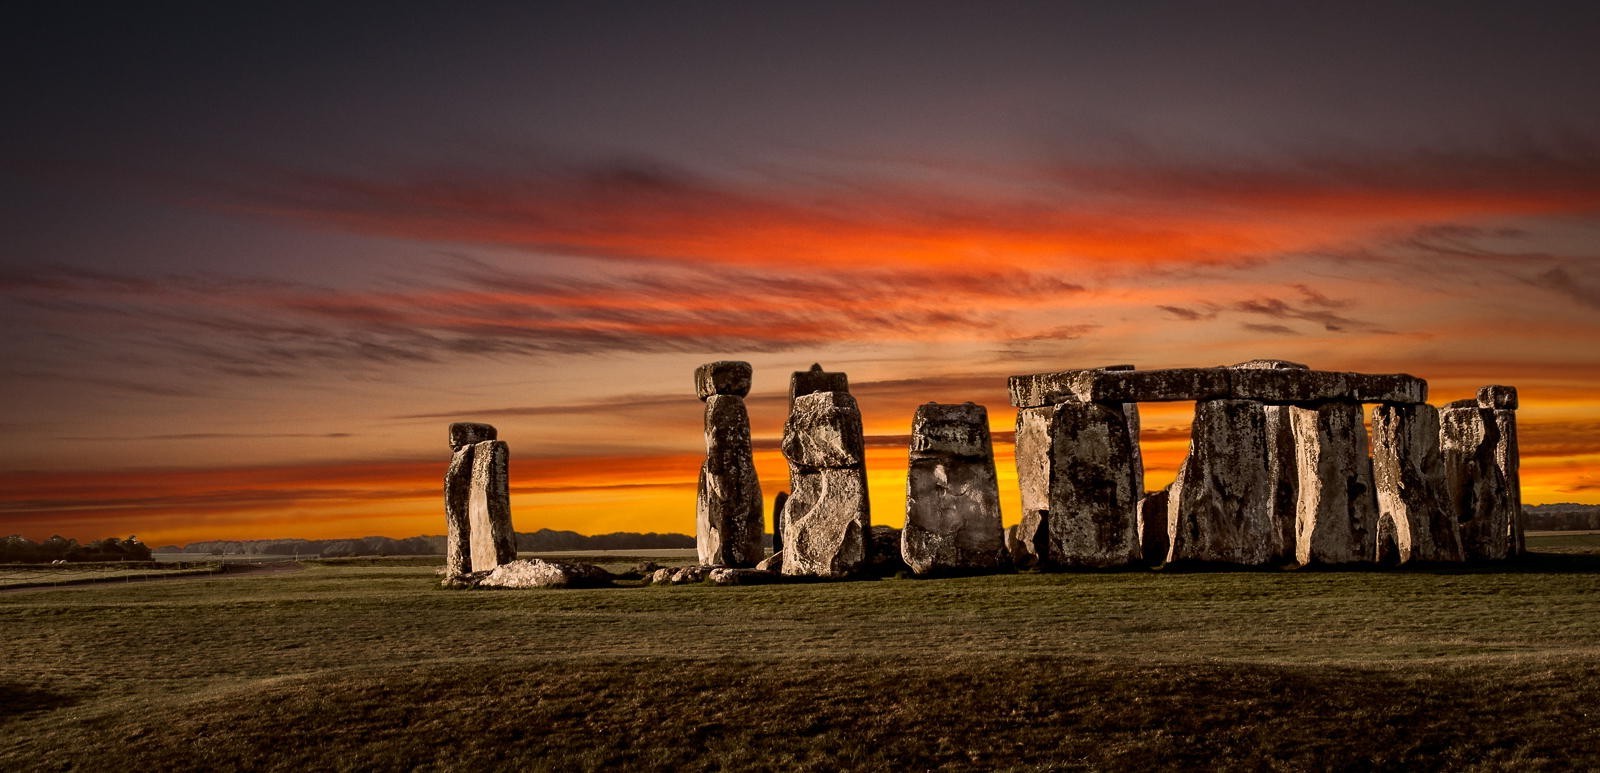 nature, Landscape, Fire, Stones, Sunset, Stonehenge, Monuments, England, Prehistoric, Field, Clouds, Yellow, Red Wallpaper